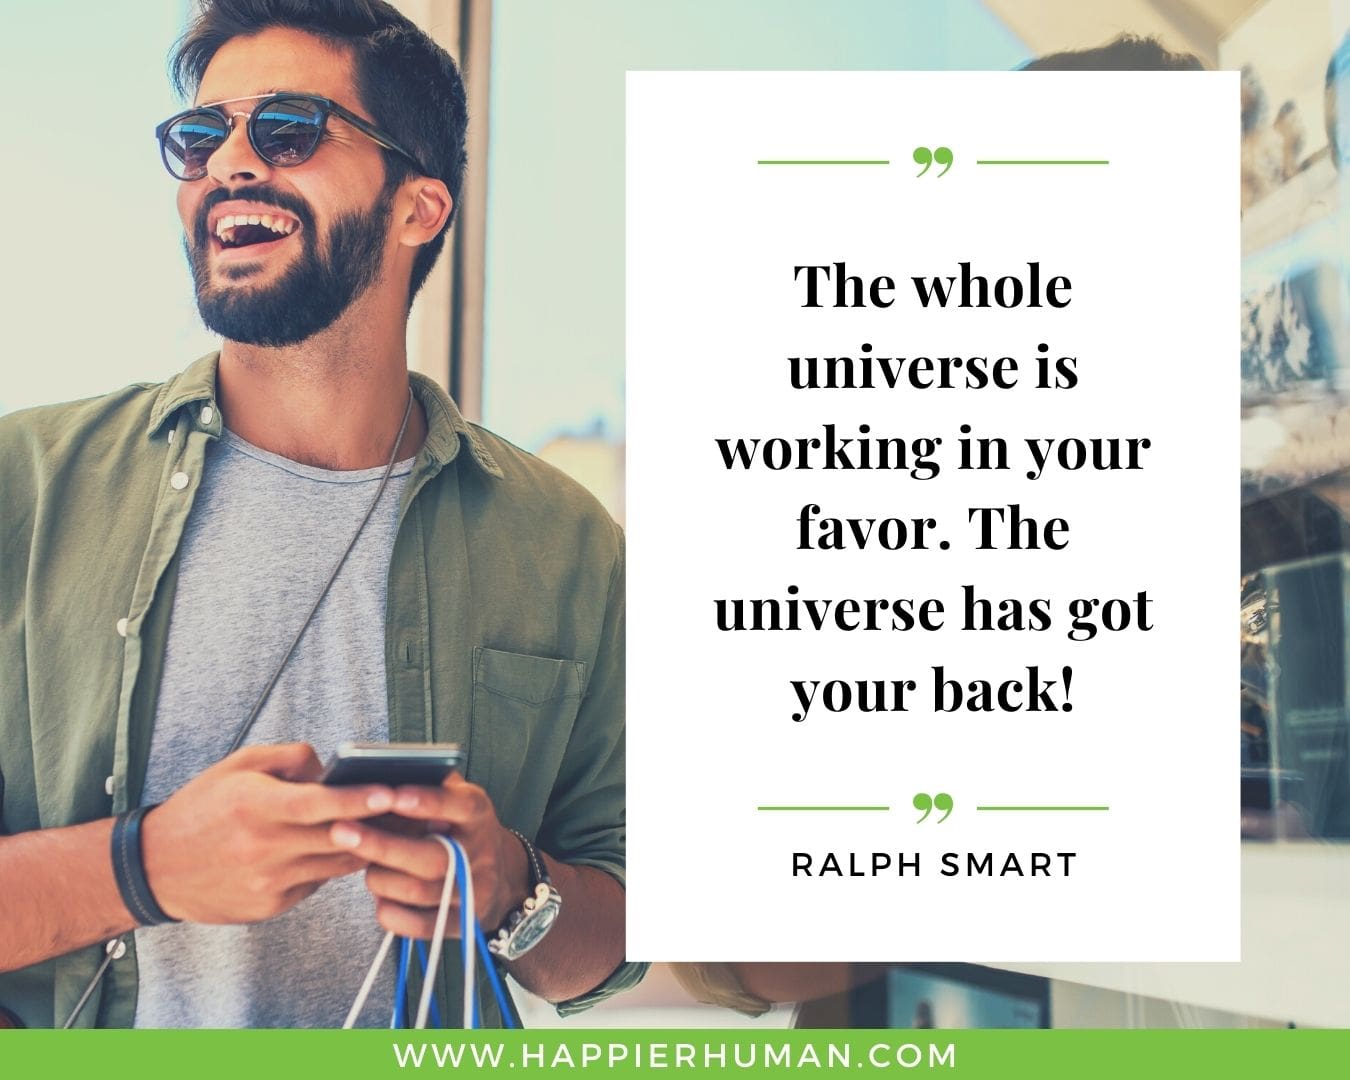 Positive Energy Quotes - “The whole universe is working in your favor. The universe has got your back!” - Ralph Smart